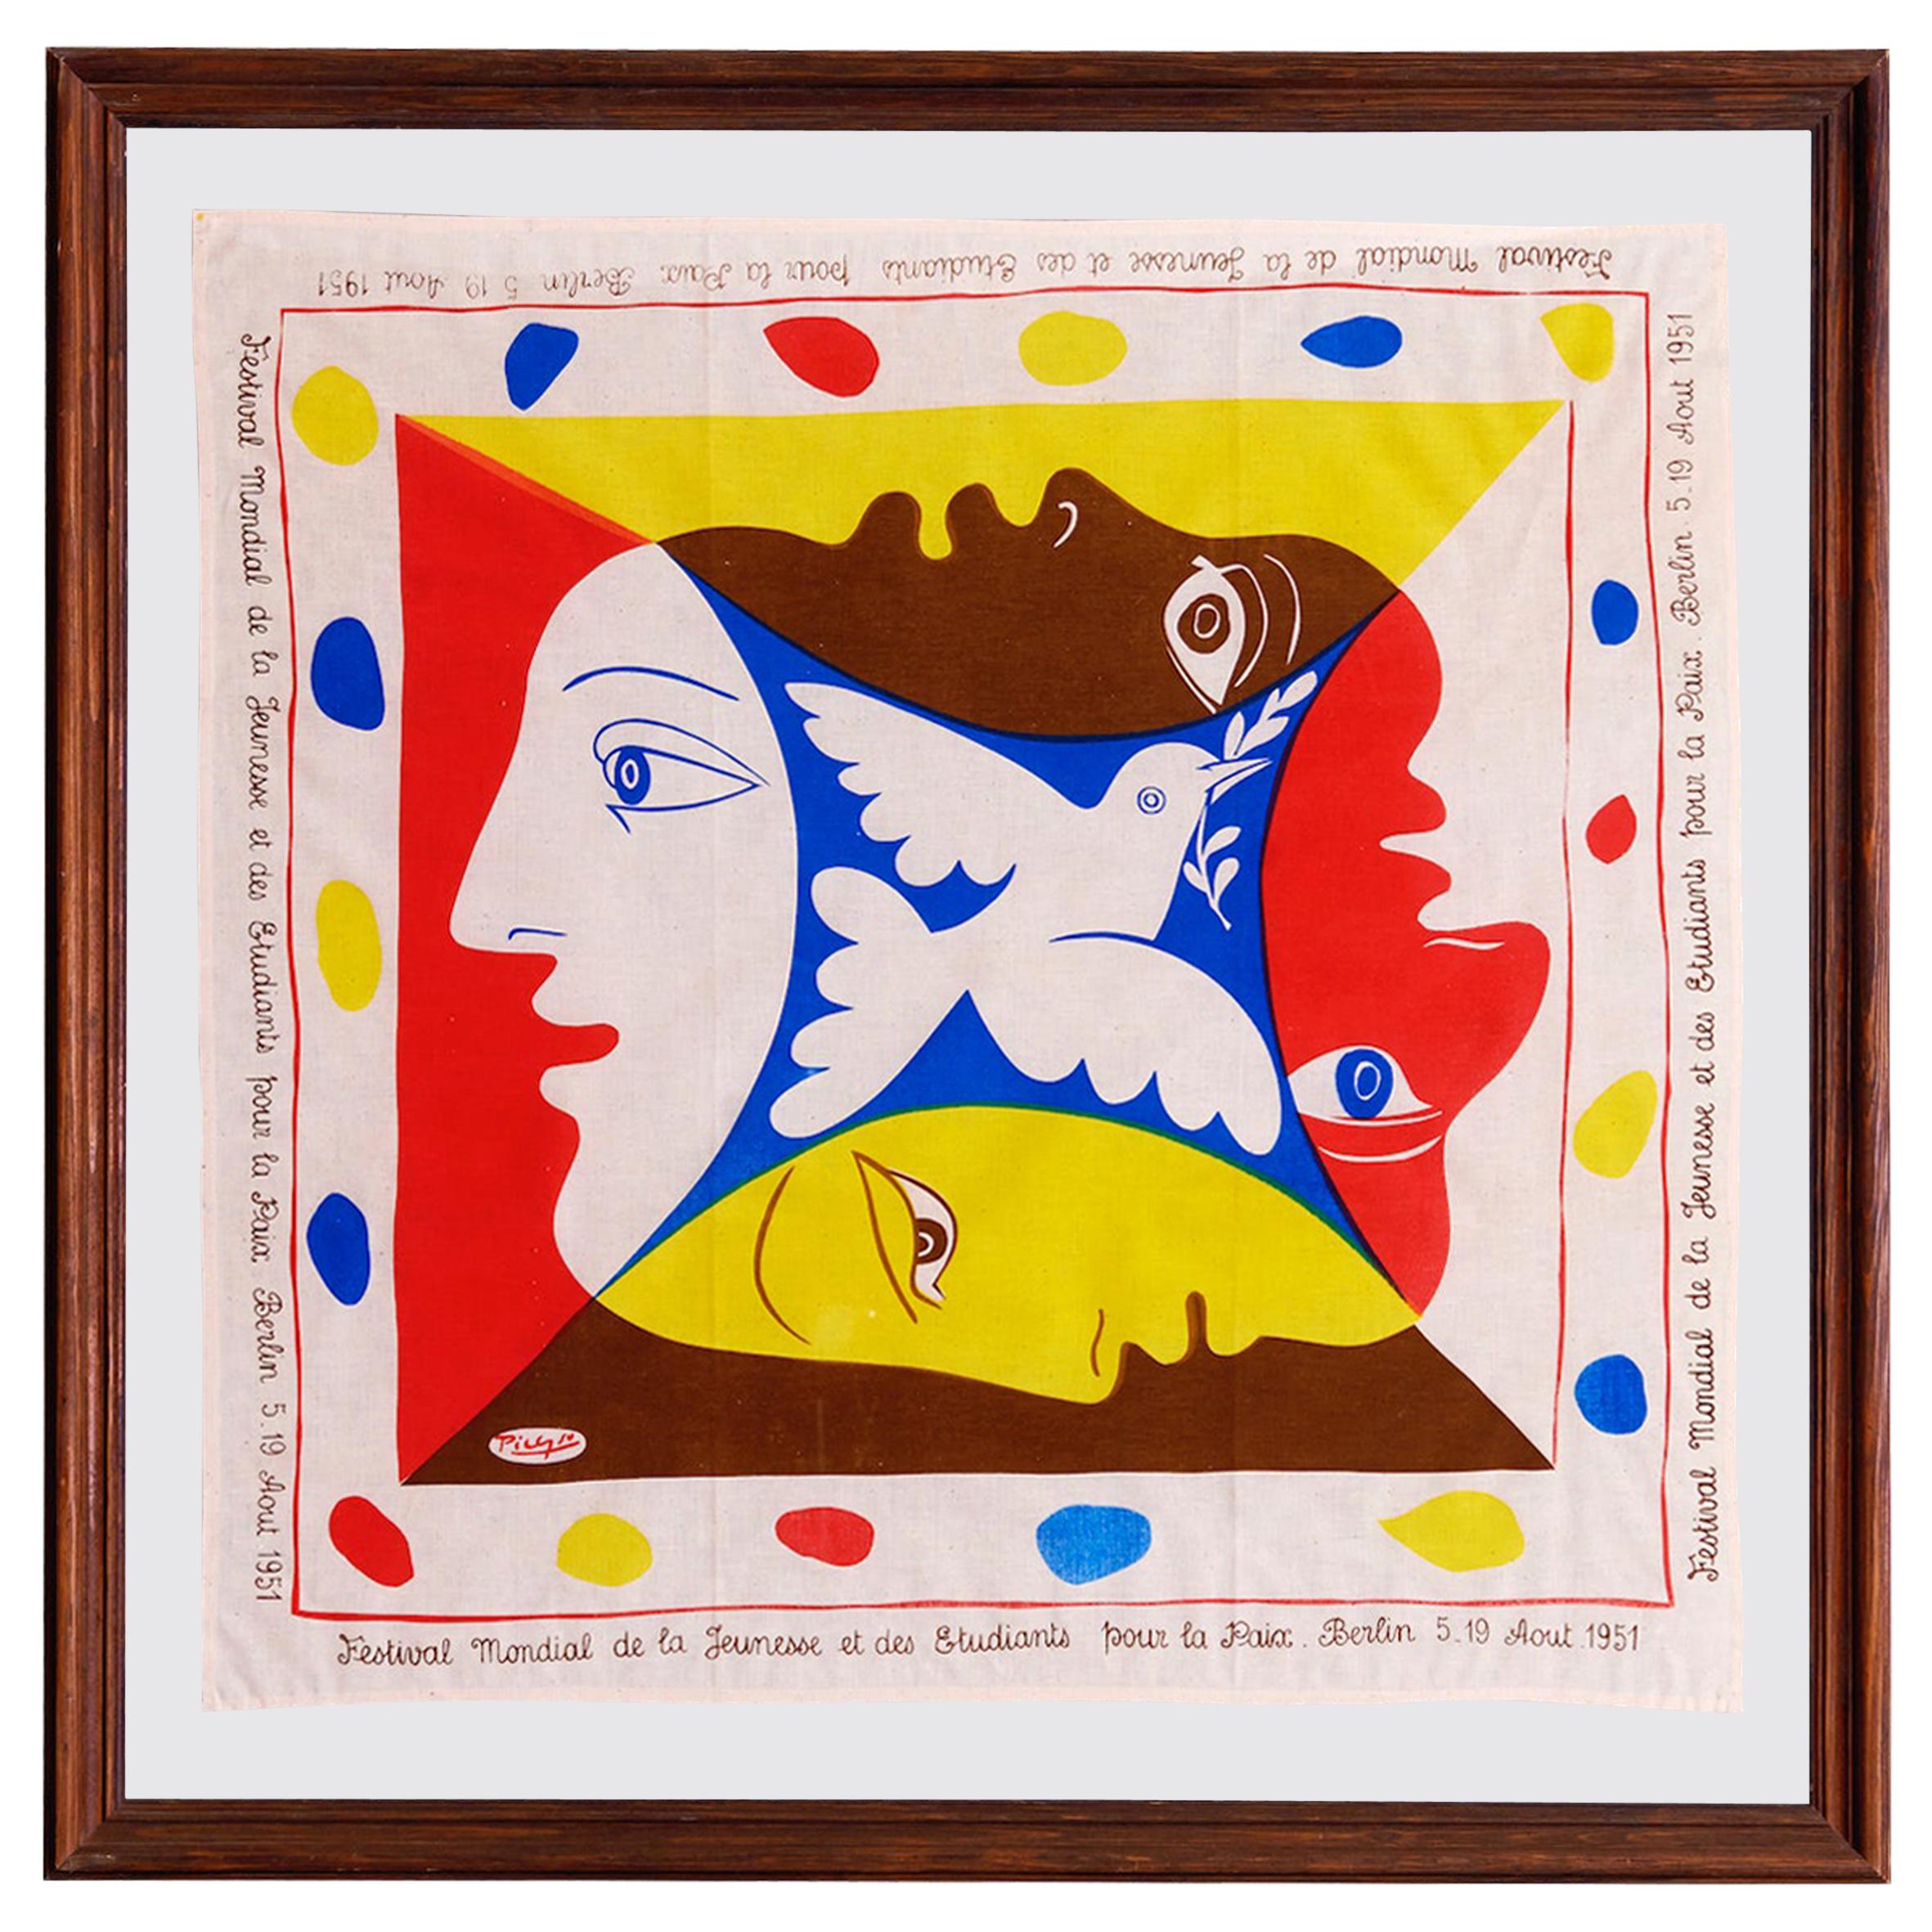 Vintage Picasso Framed Cotton Scarf With Multicolored Print, Germany, 1951